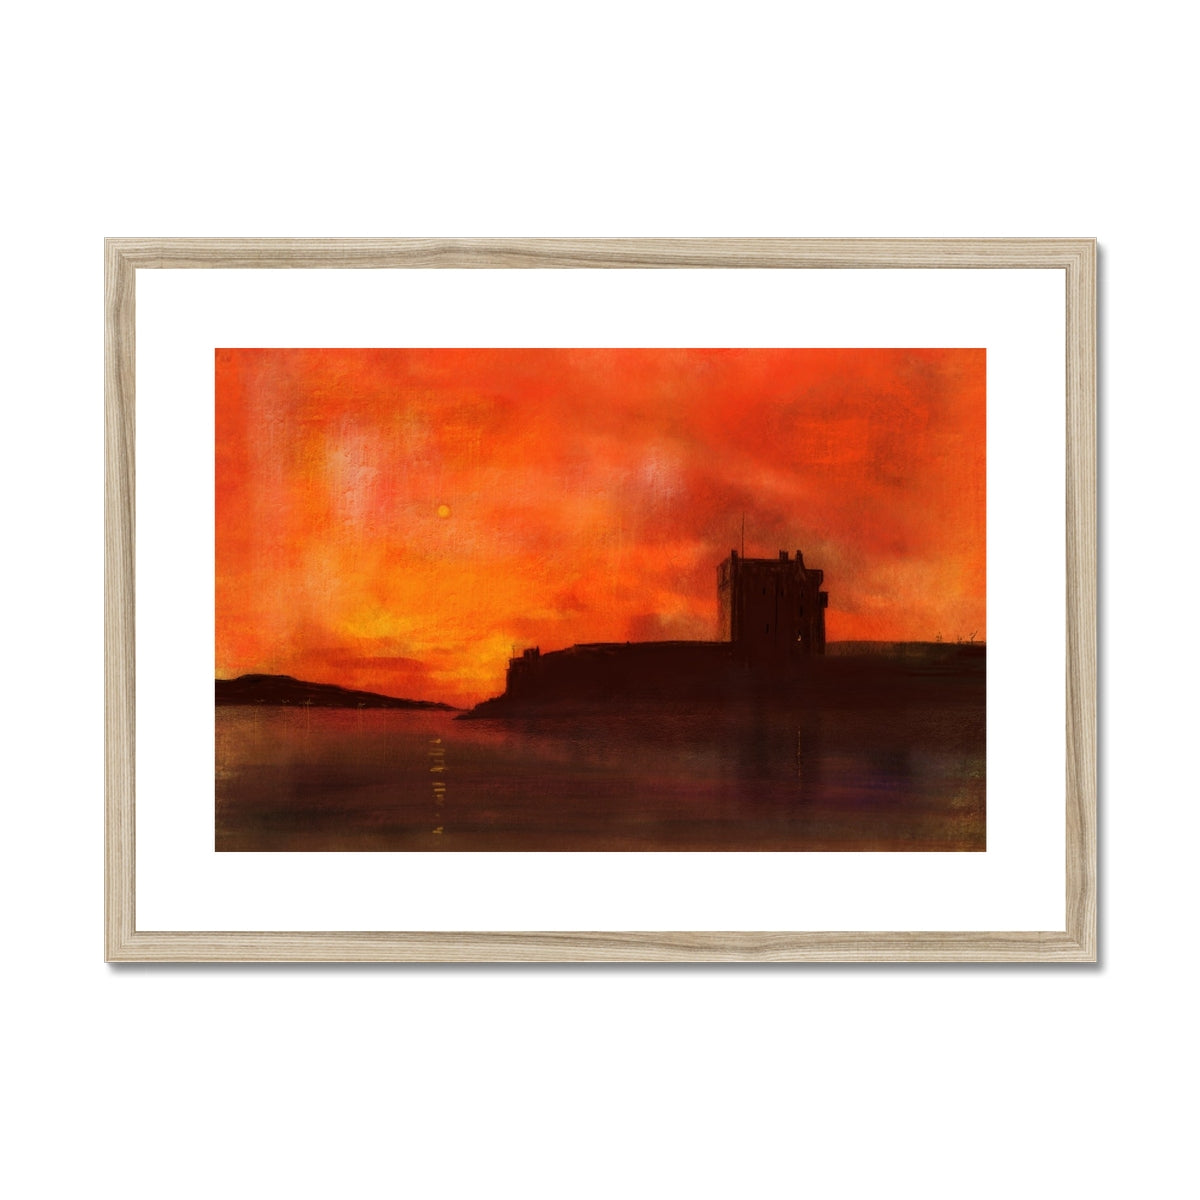 Broughty Castle Sunset Painting | Framed & Mounted Prints From Scotland-Framed & Mounted Prints-Historic & Iconic Scotland Art Gallery-A2 Landscape-Natural Frame-Paintings, Prints, Homeware, Art Gifts From Scotland By Scottish Artist Kevin Hunter